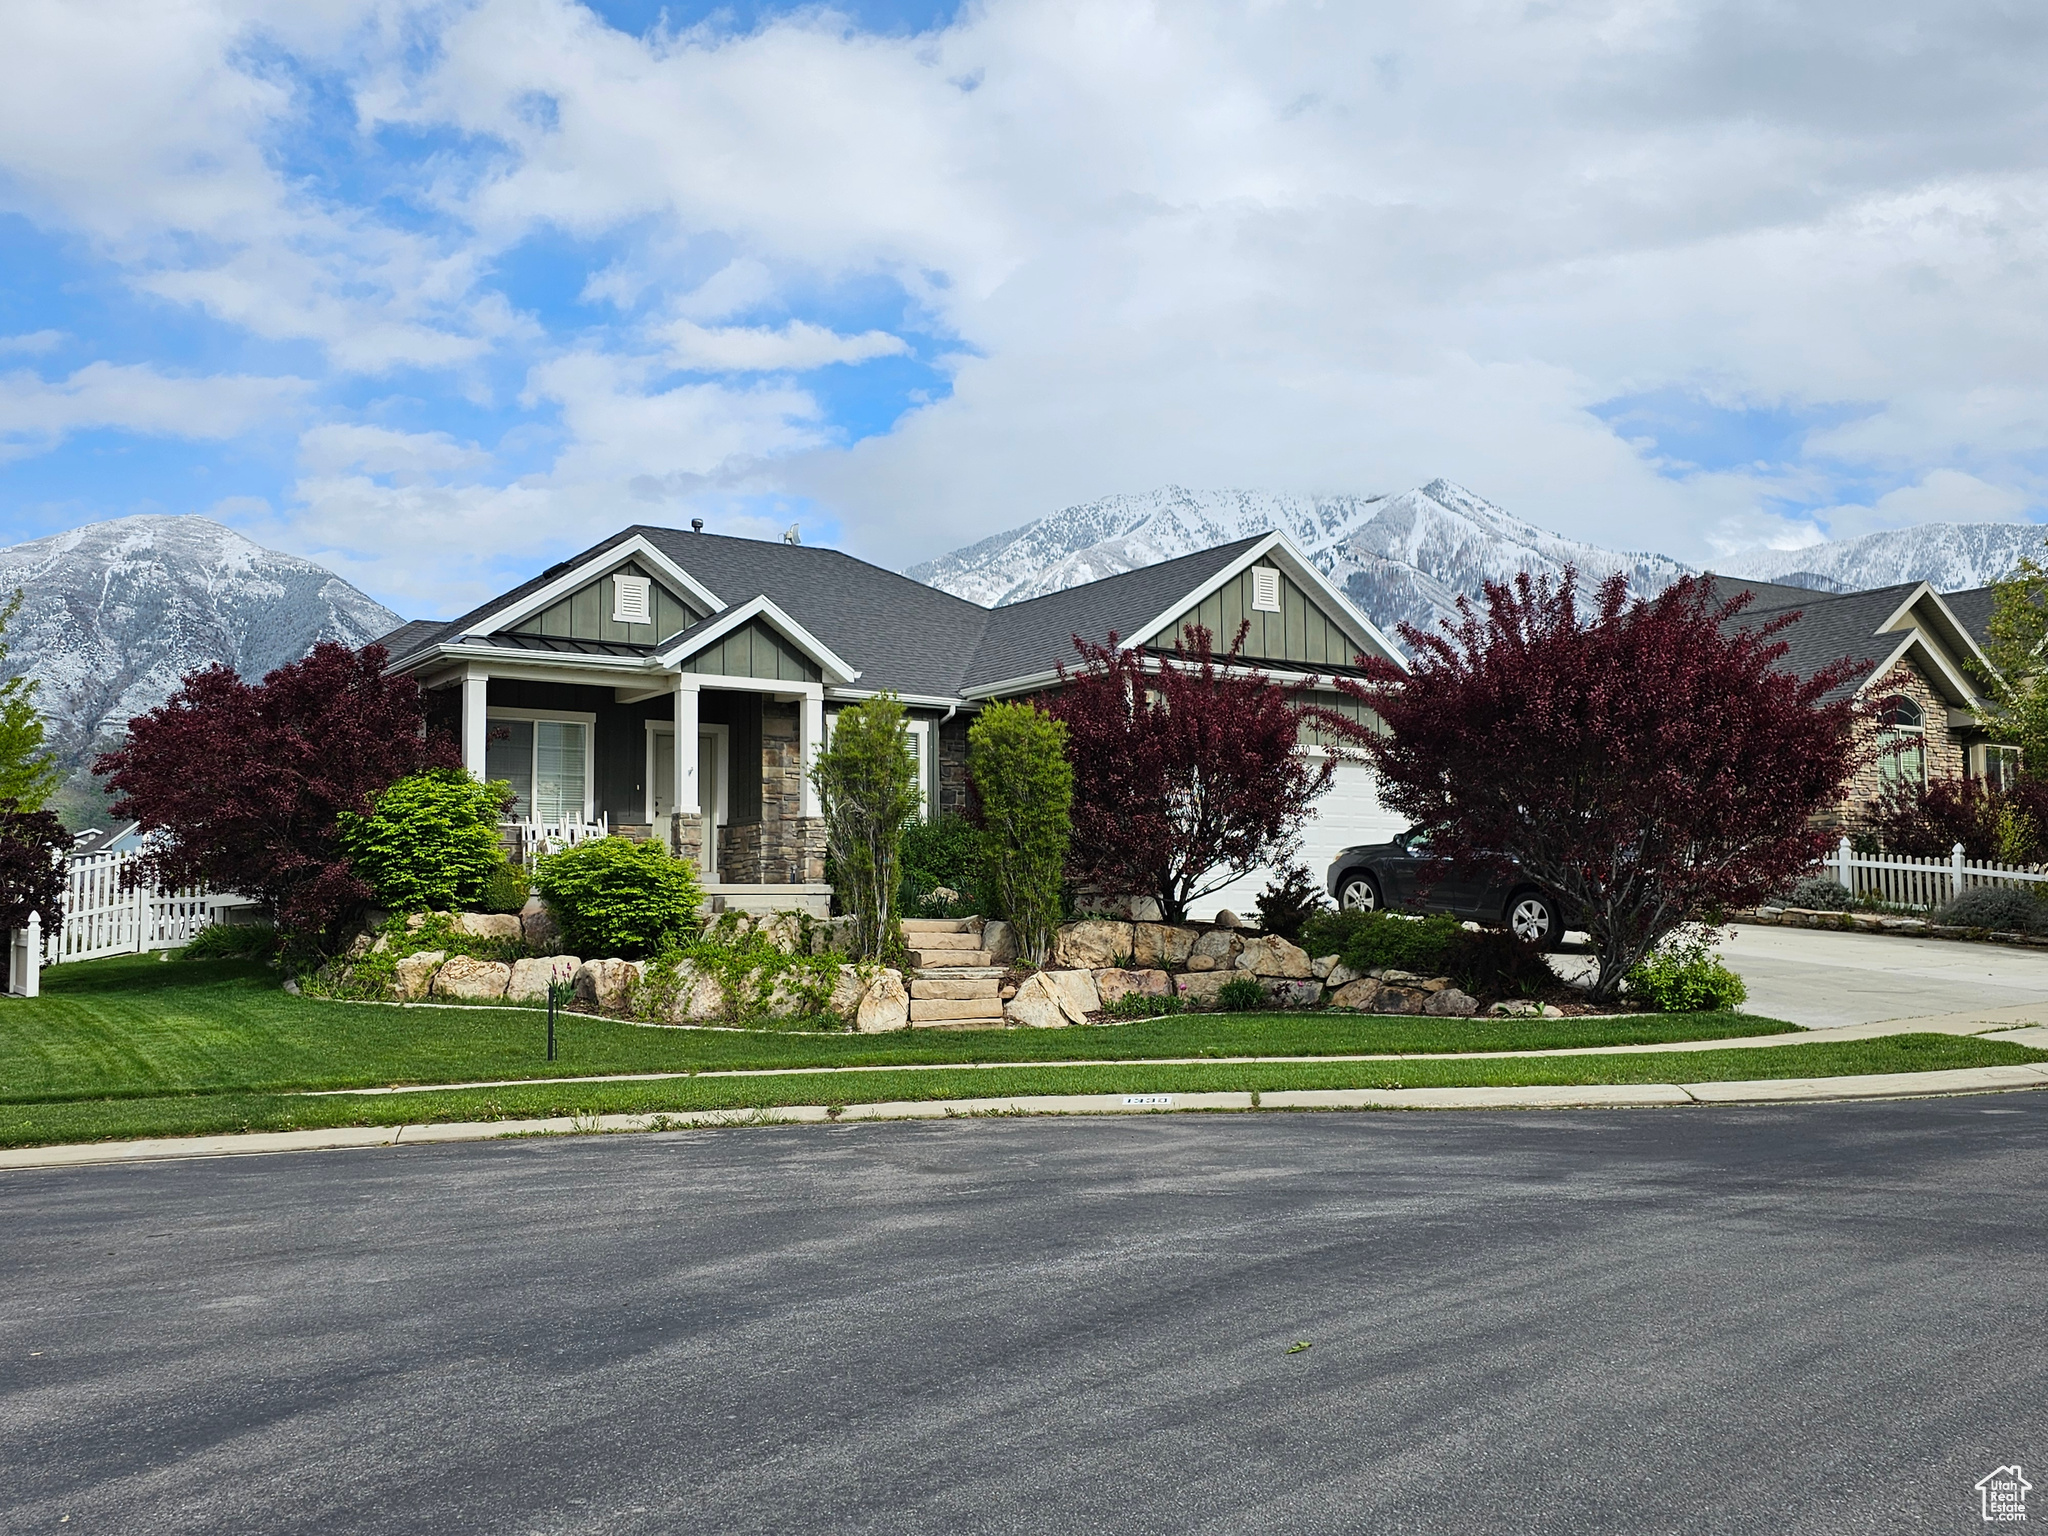 View of front of home with a mountain view, covered porch, and a front lawn